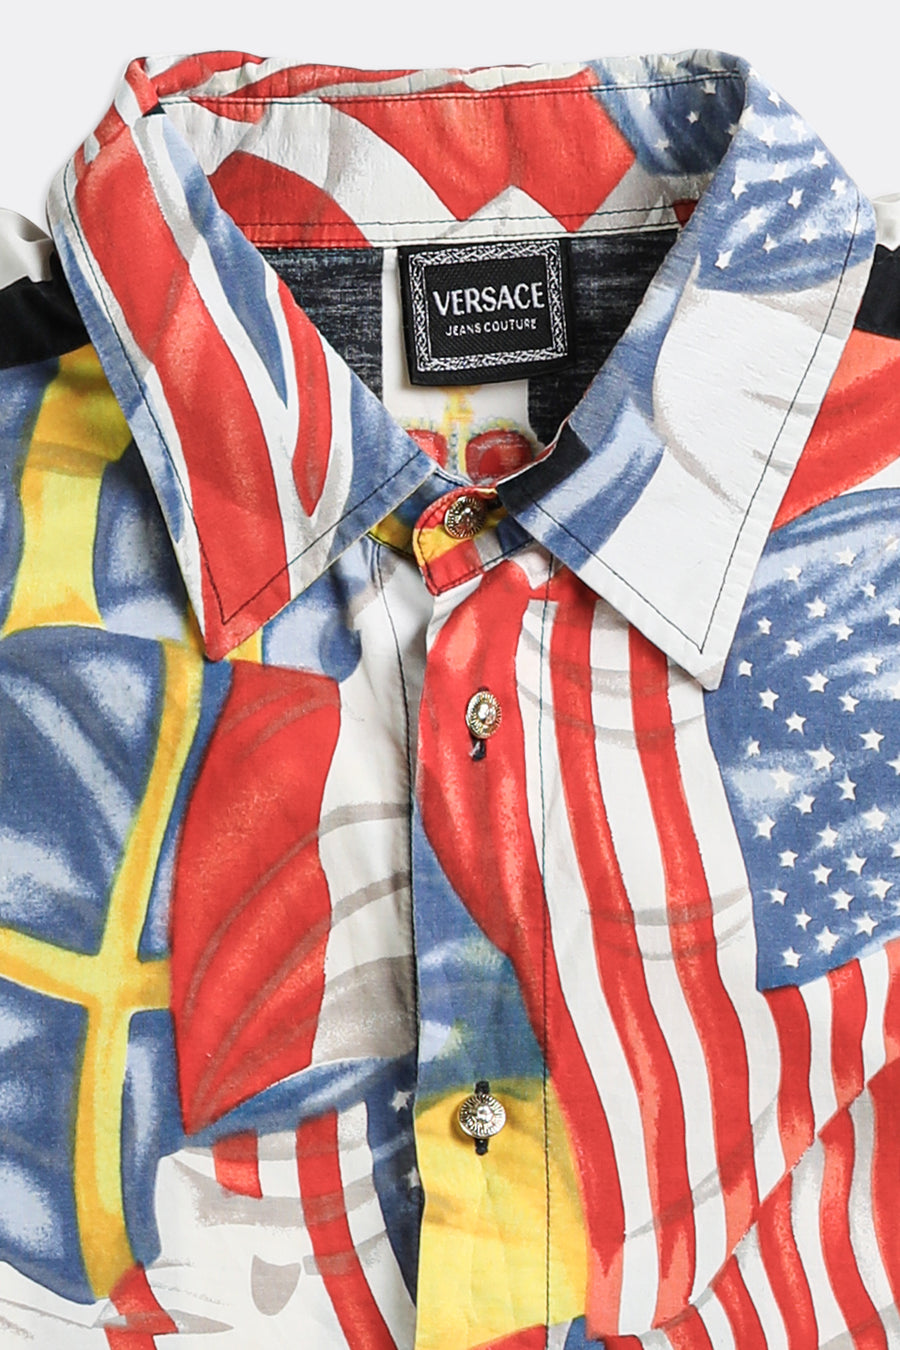 Vintage Versace Jeans Collared Shirt